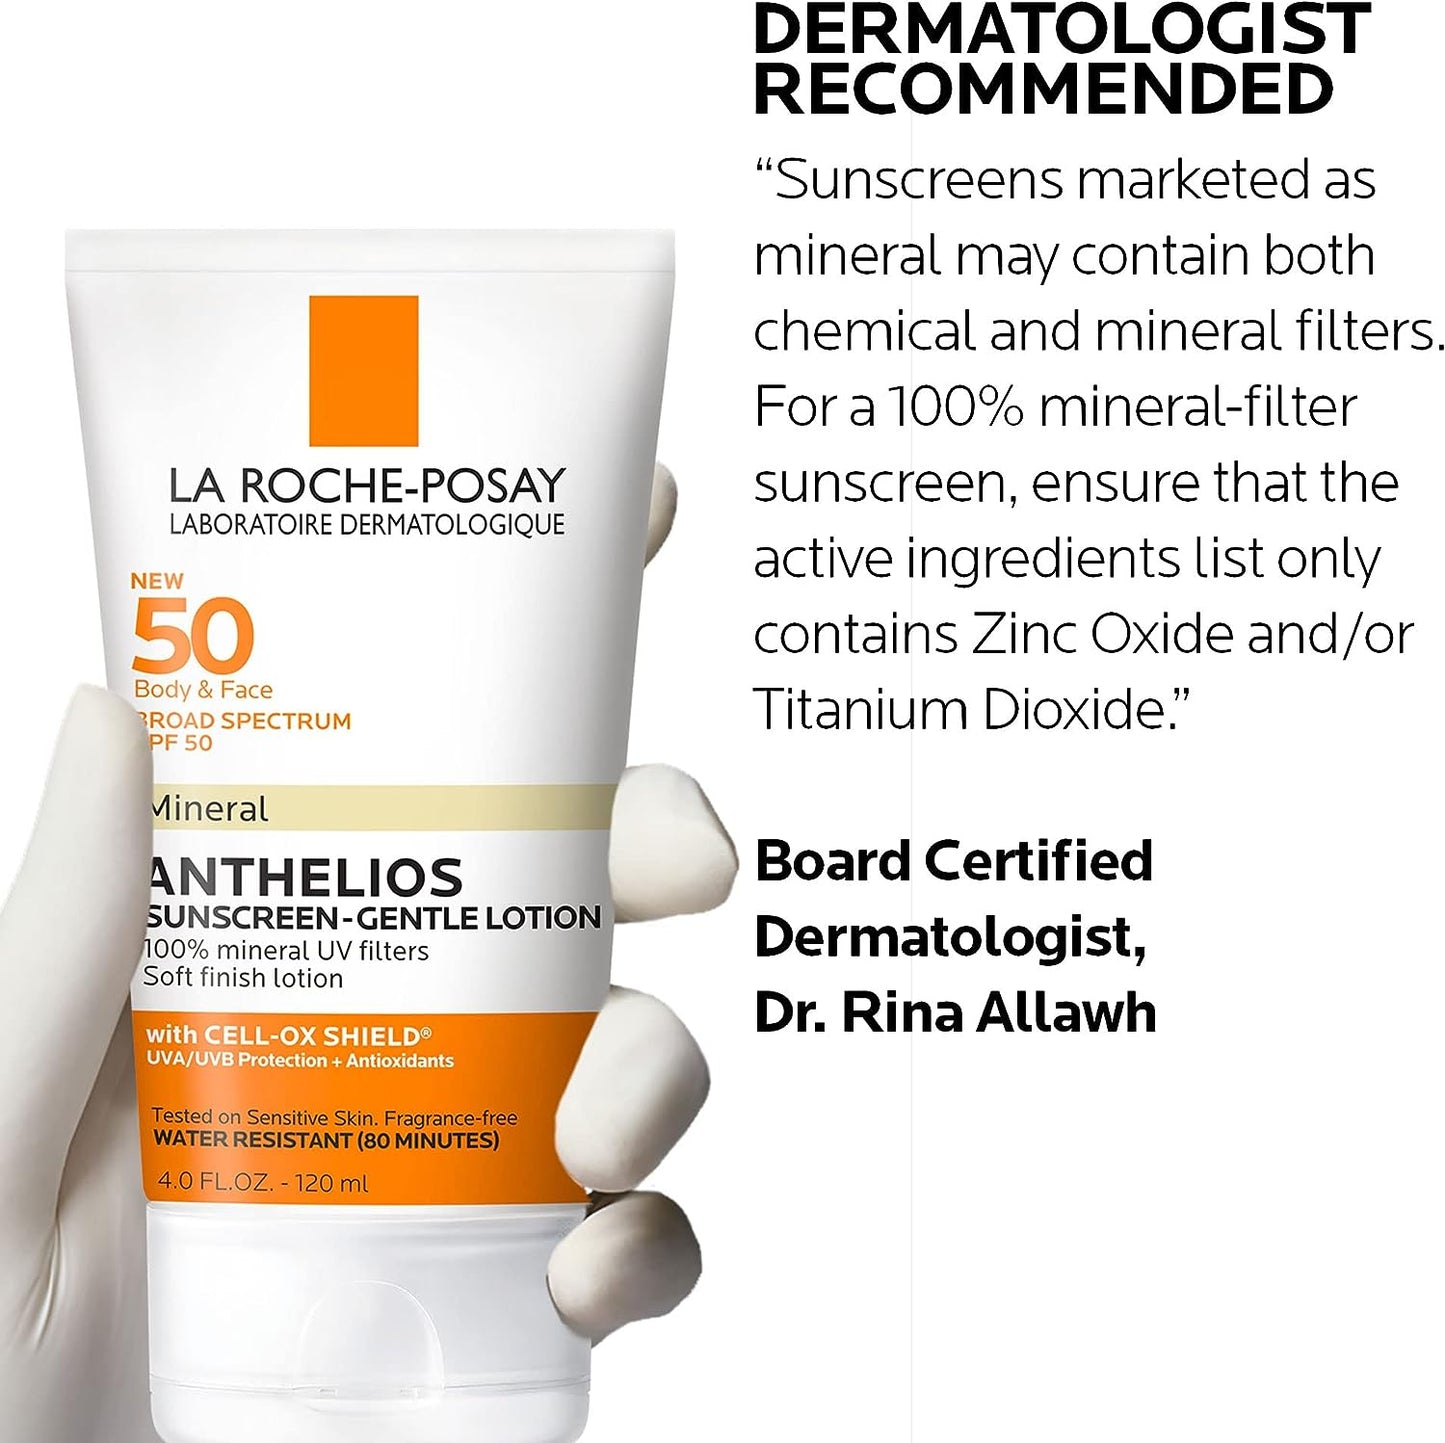 La Roche-Posay Anthelios Mineral Sunscreen- Gentle Lotion Spf50, 90ml